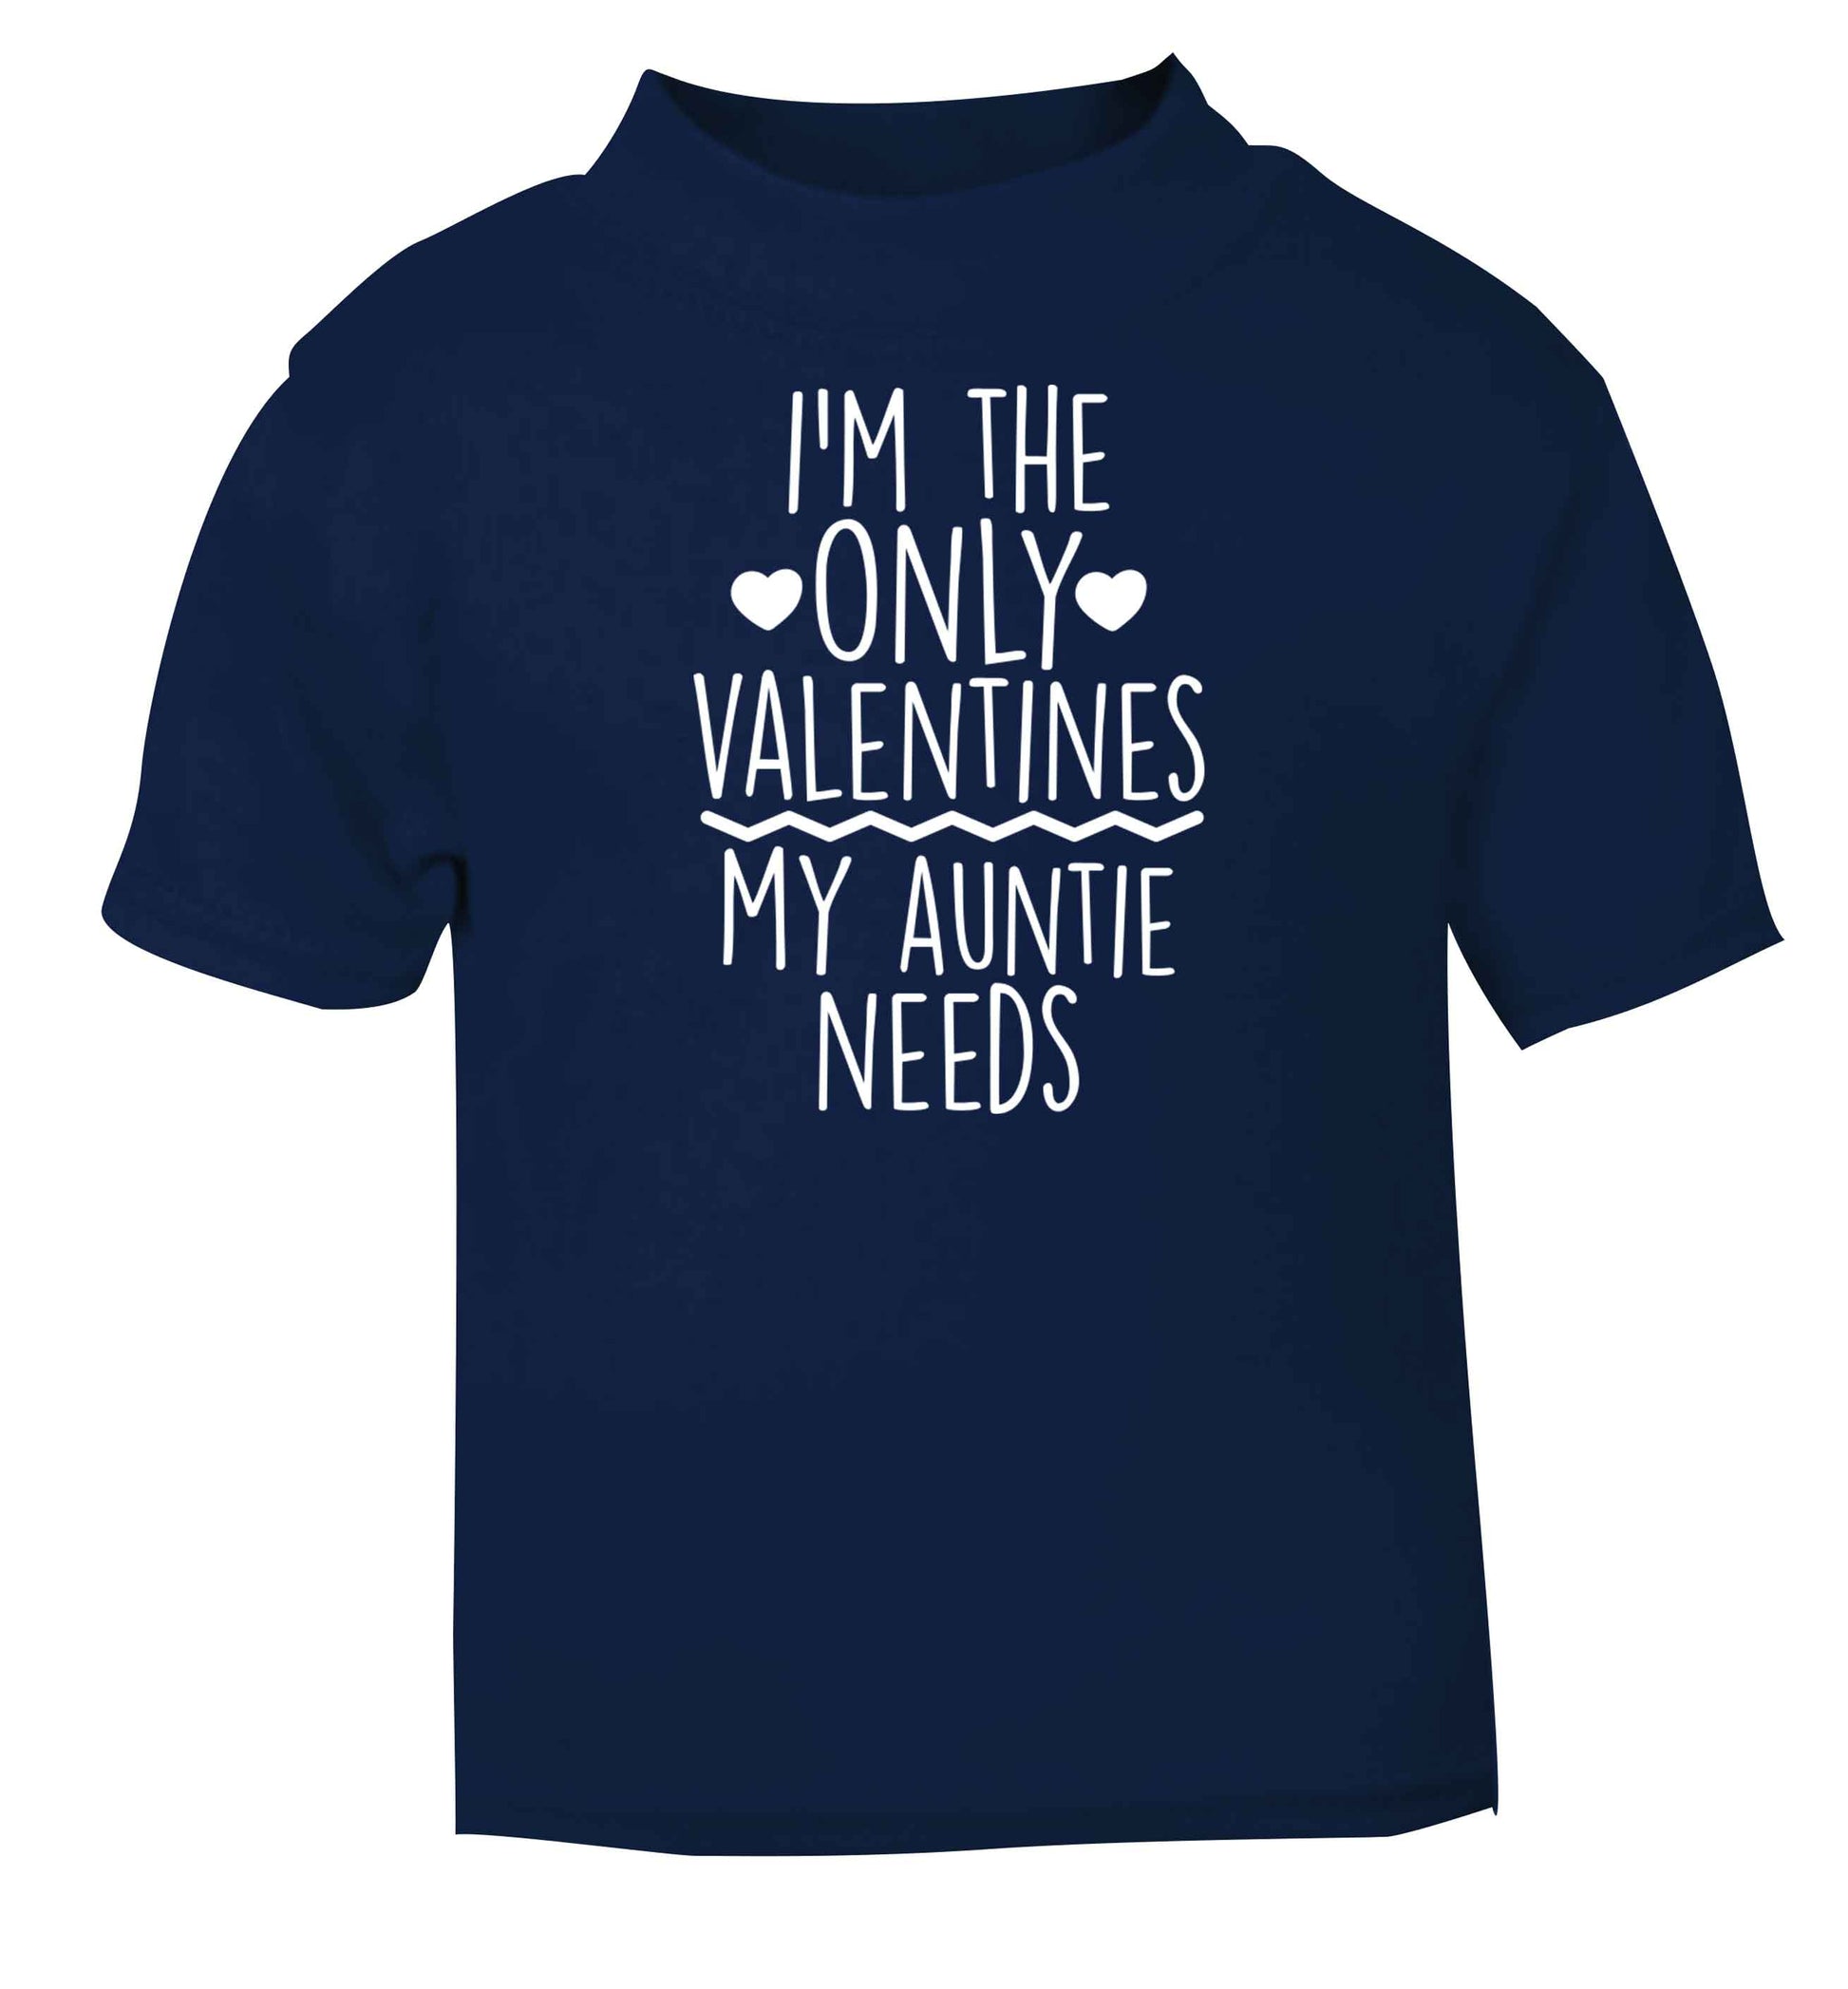 I'm the only valentines my auntie needs navy baby toddler Tshirt 2 Years